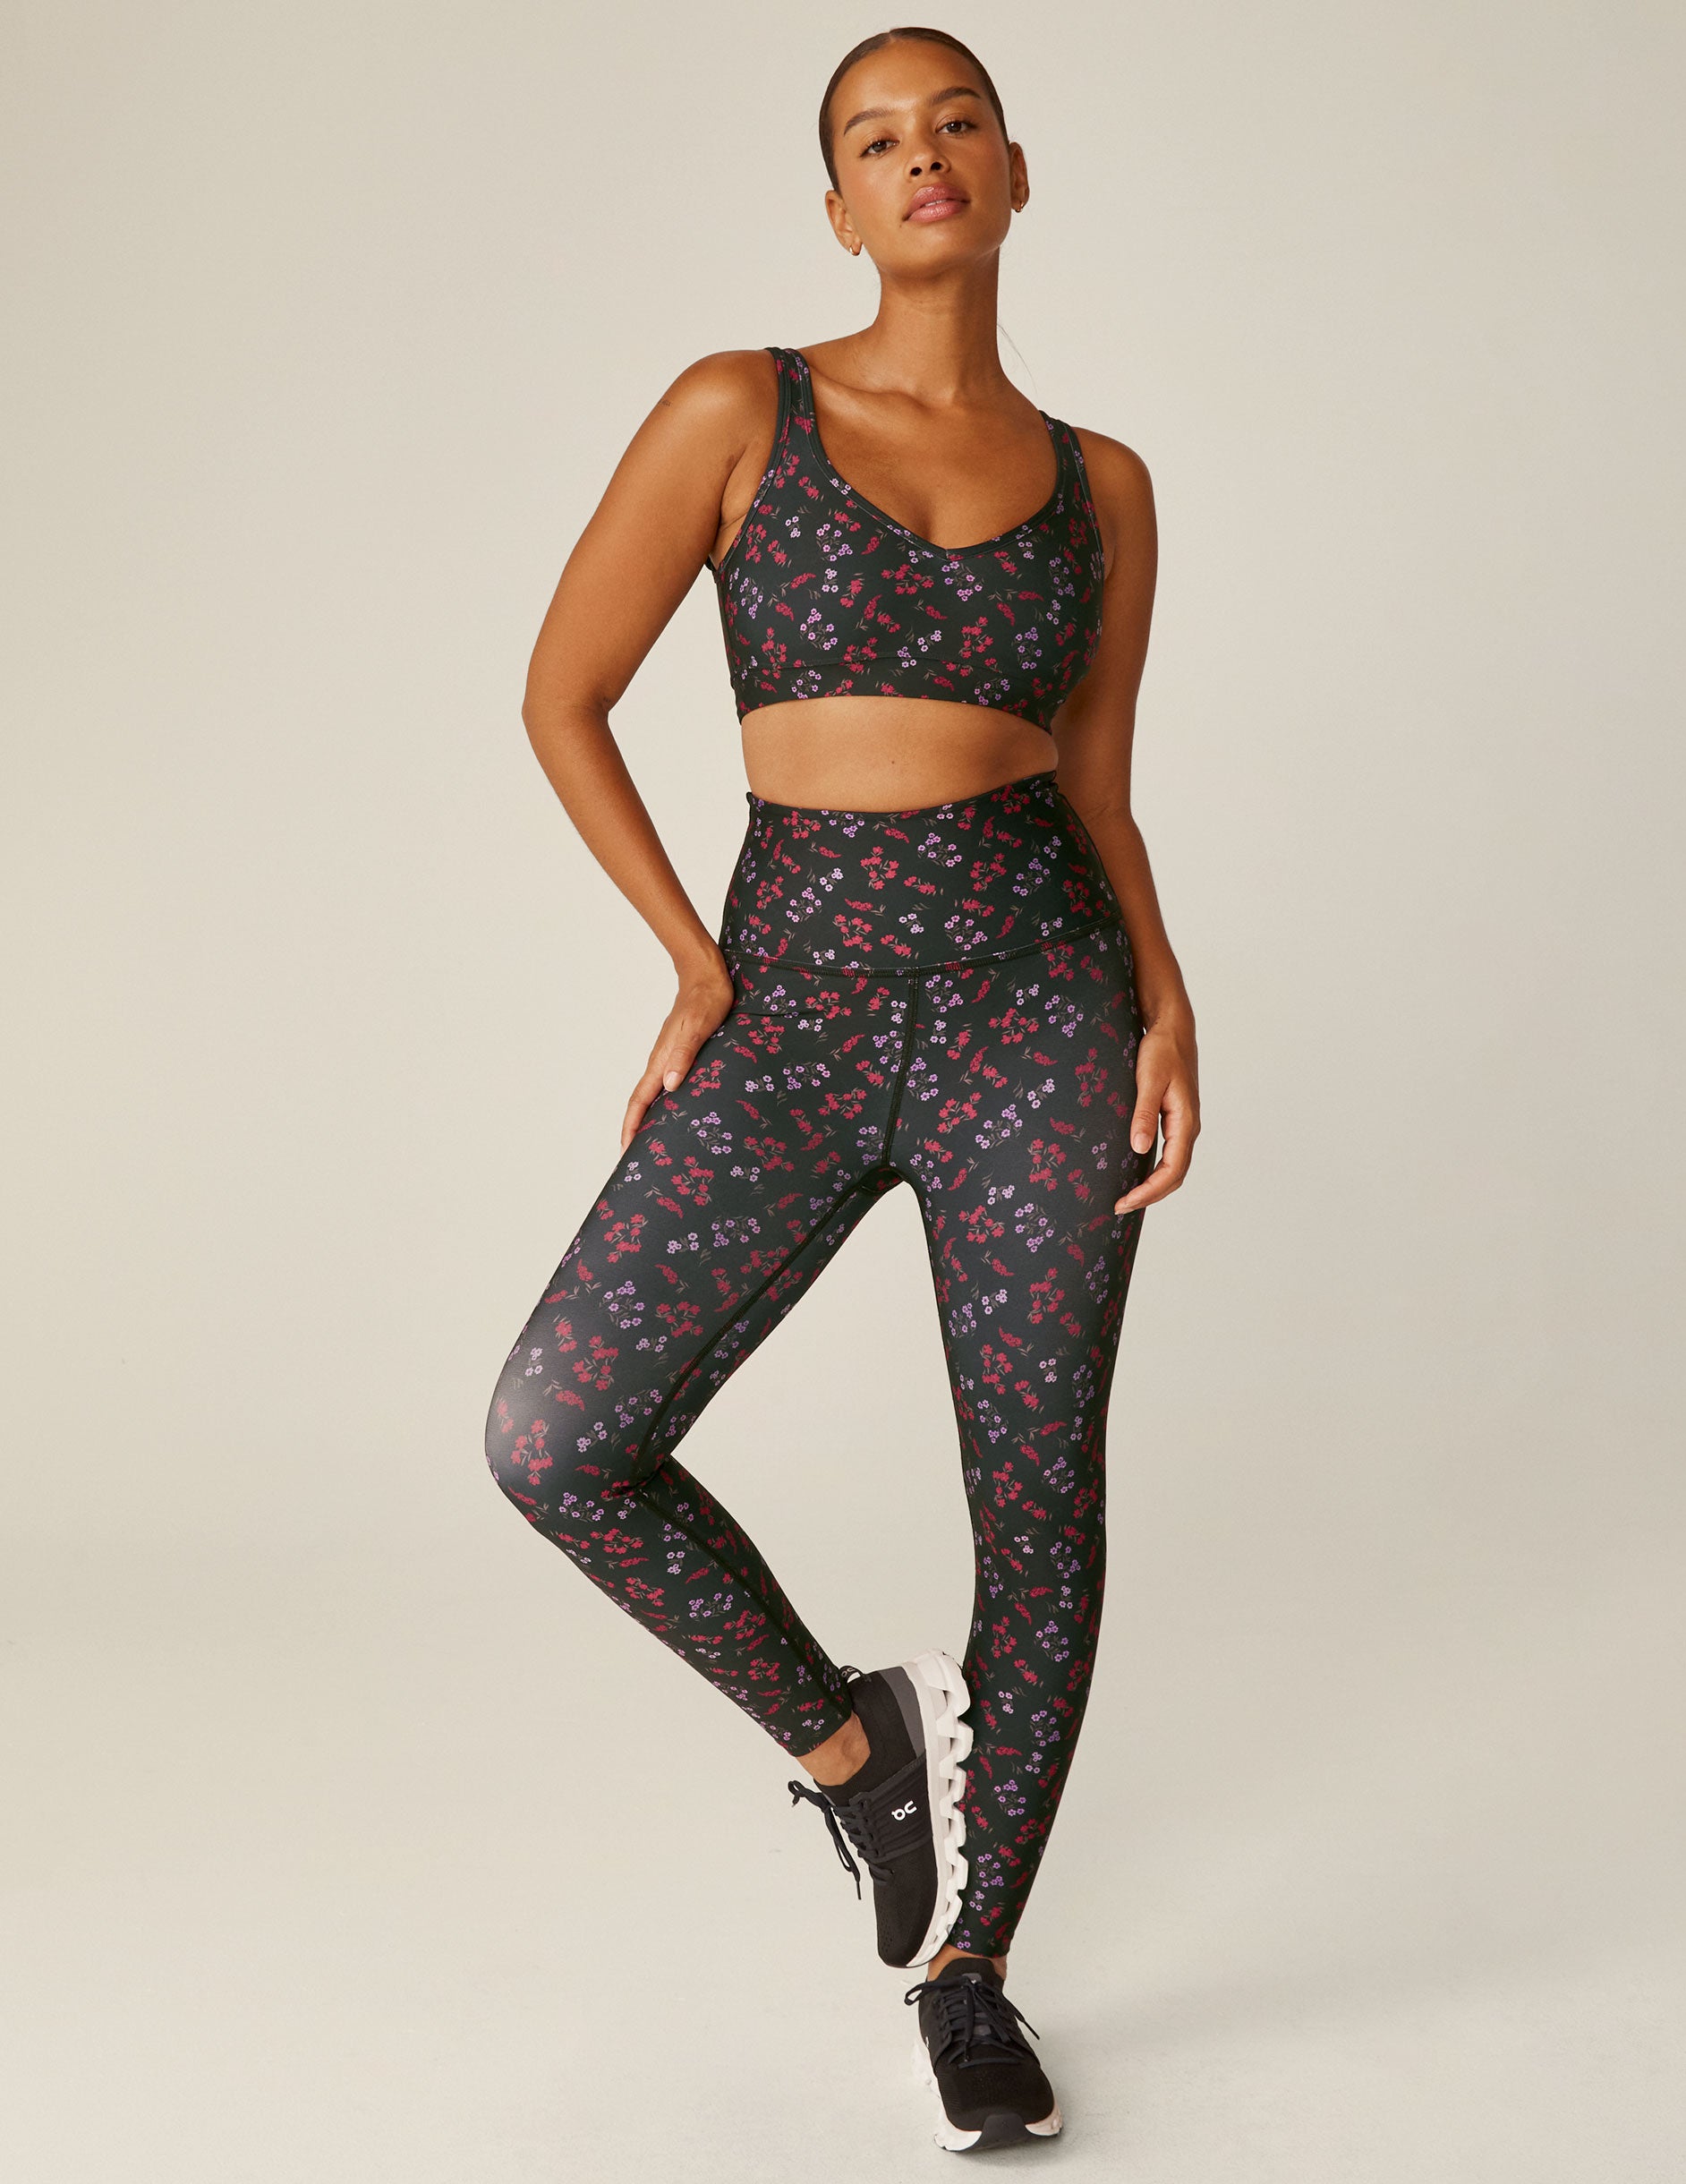 black floral printed (red and purple flowers) sweetheart neckline sports bra. 